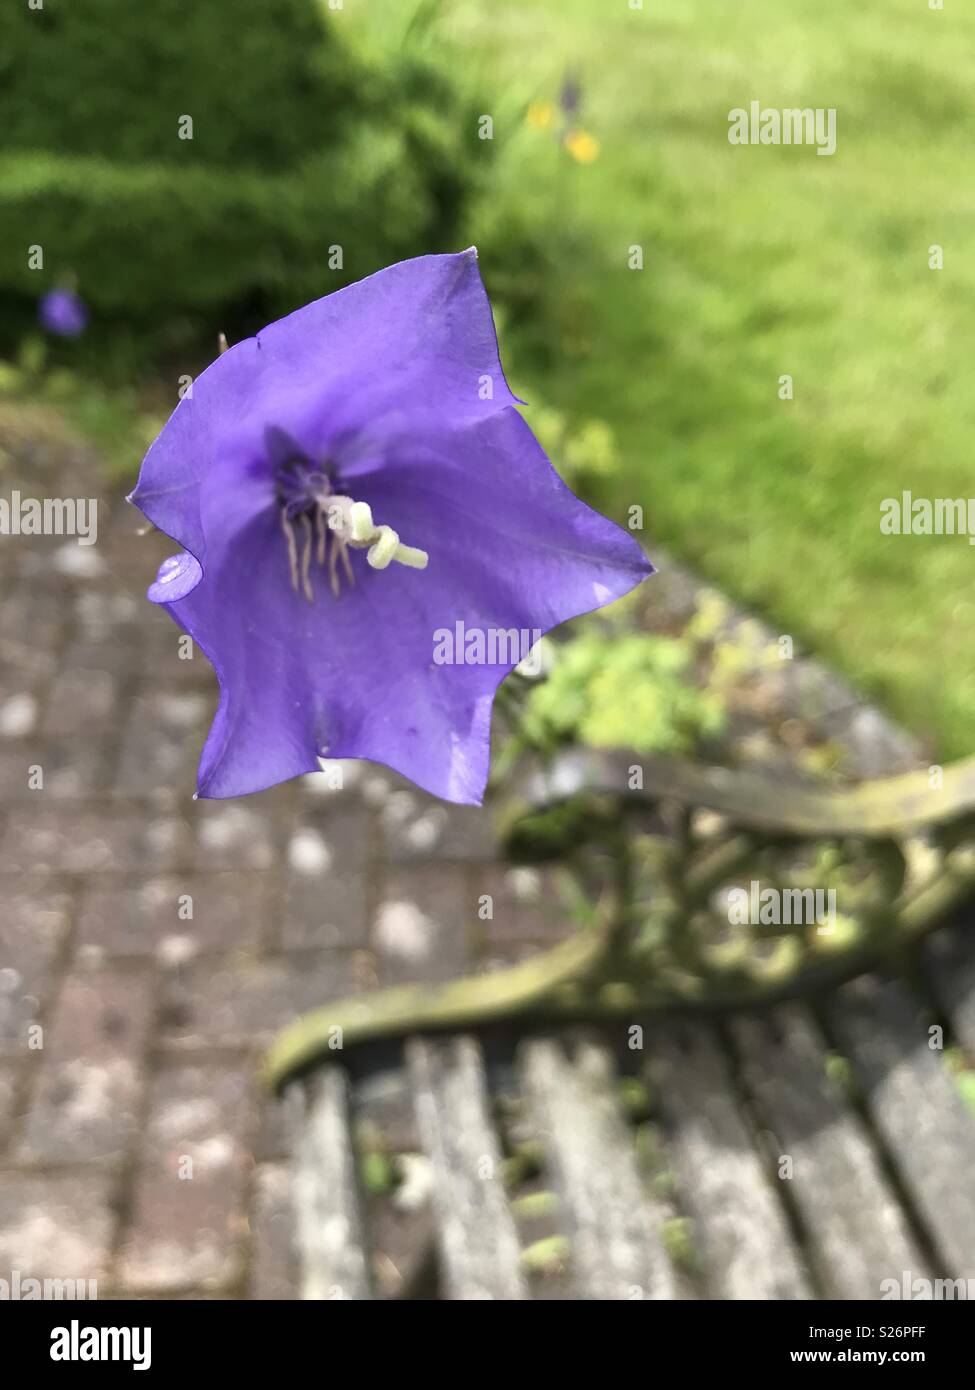 Close up of a peach-leaf bellflower next to a garden bench Stock Photo